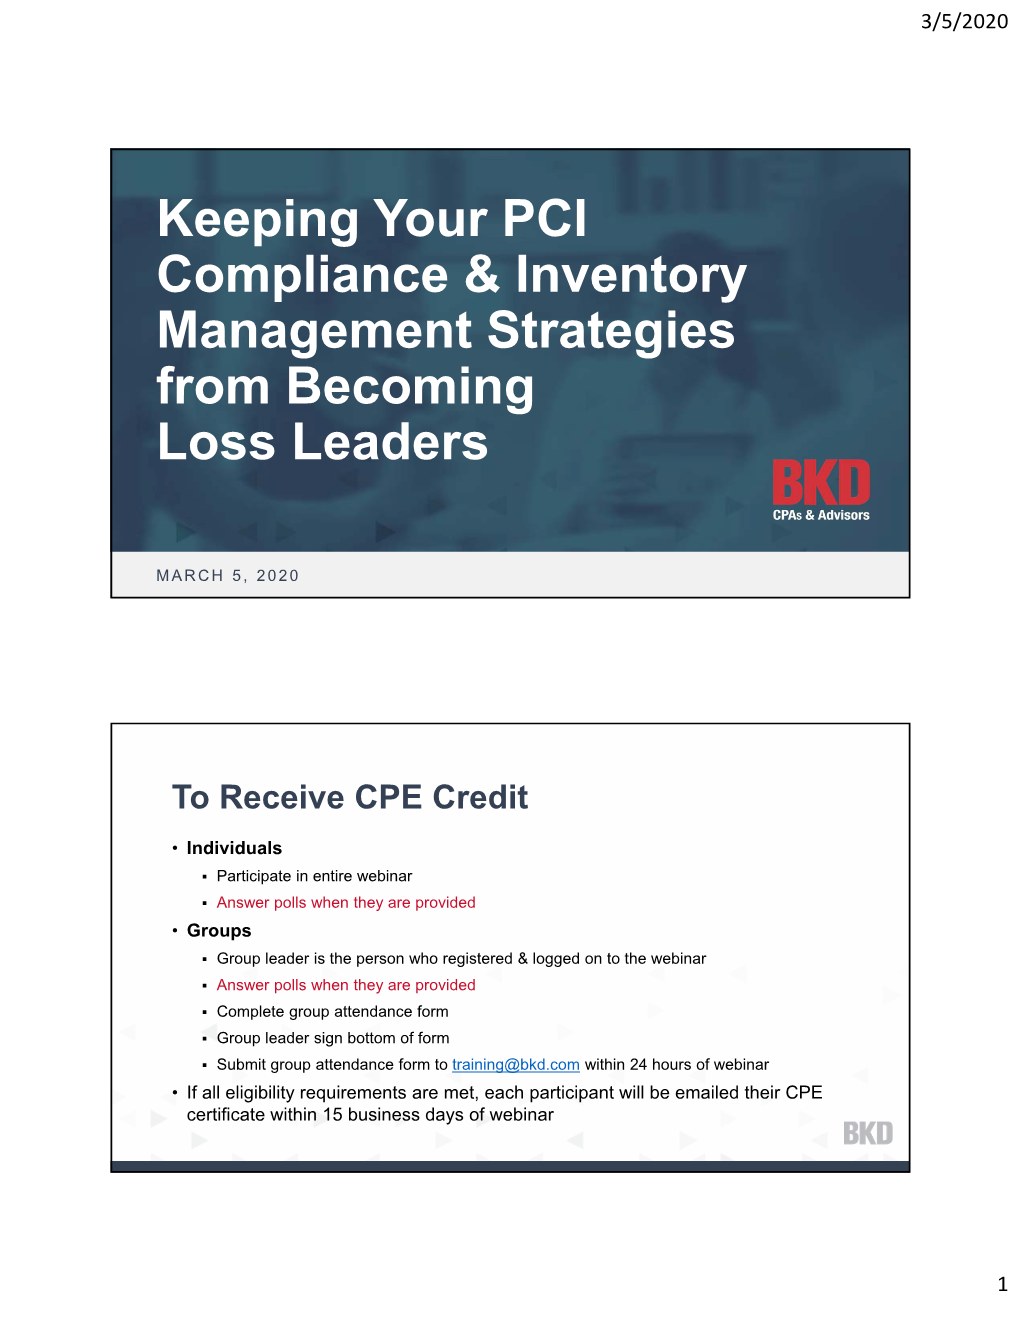 Keeping Your PCI Compliance & Inventory Management Strategies